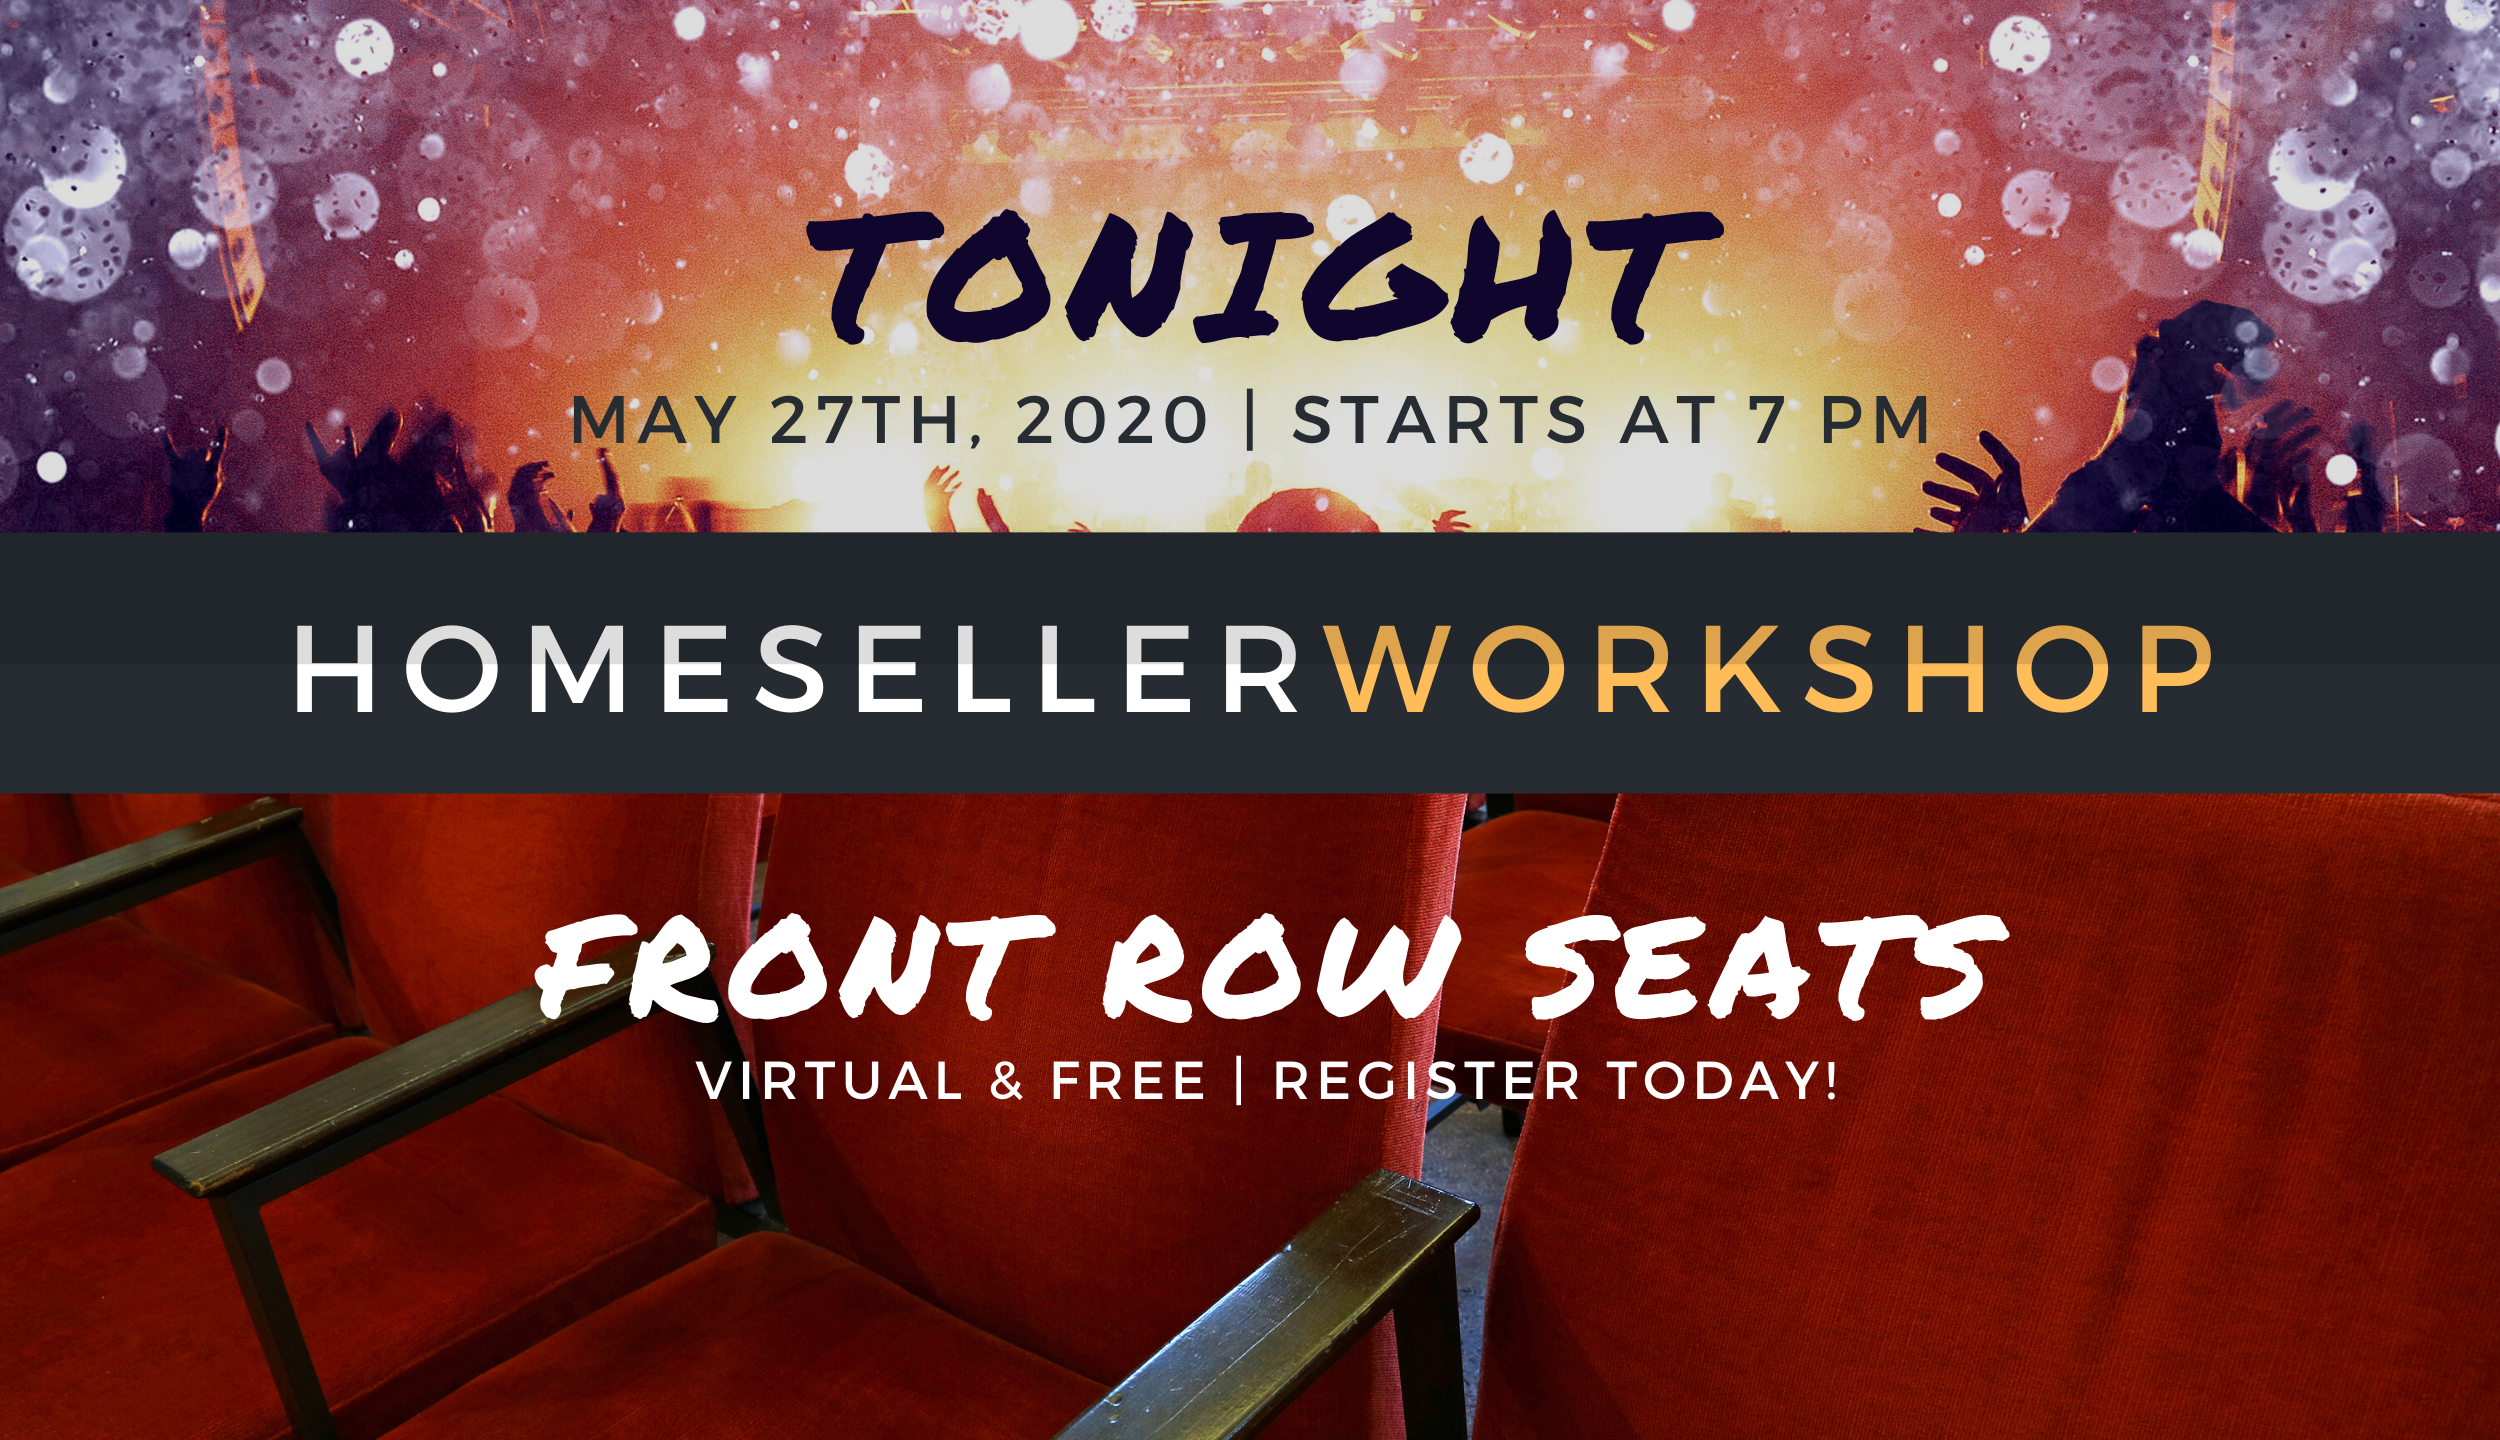 HomeSeller Workshop – FREE and ONLINE! Tonight, May 27th @ 7pm